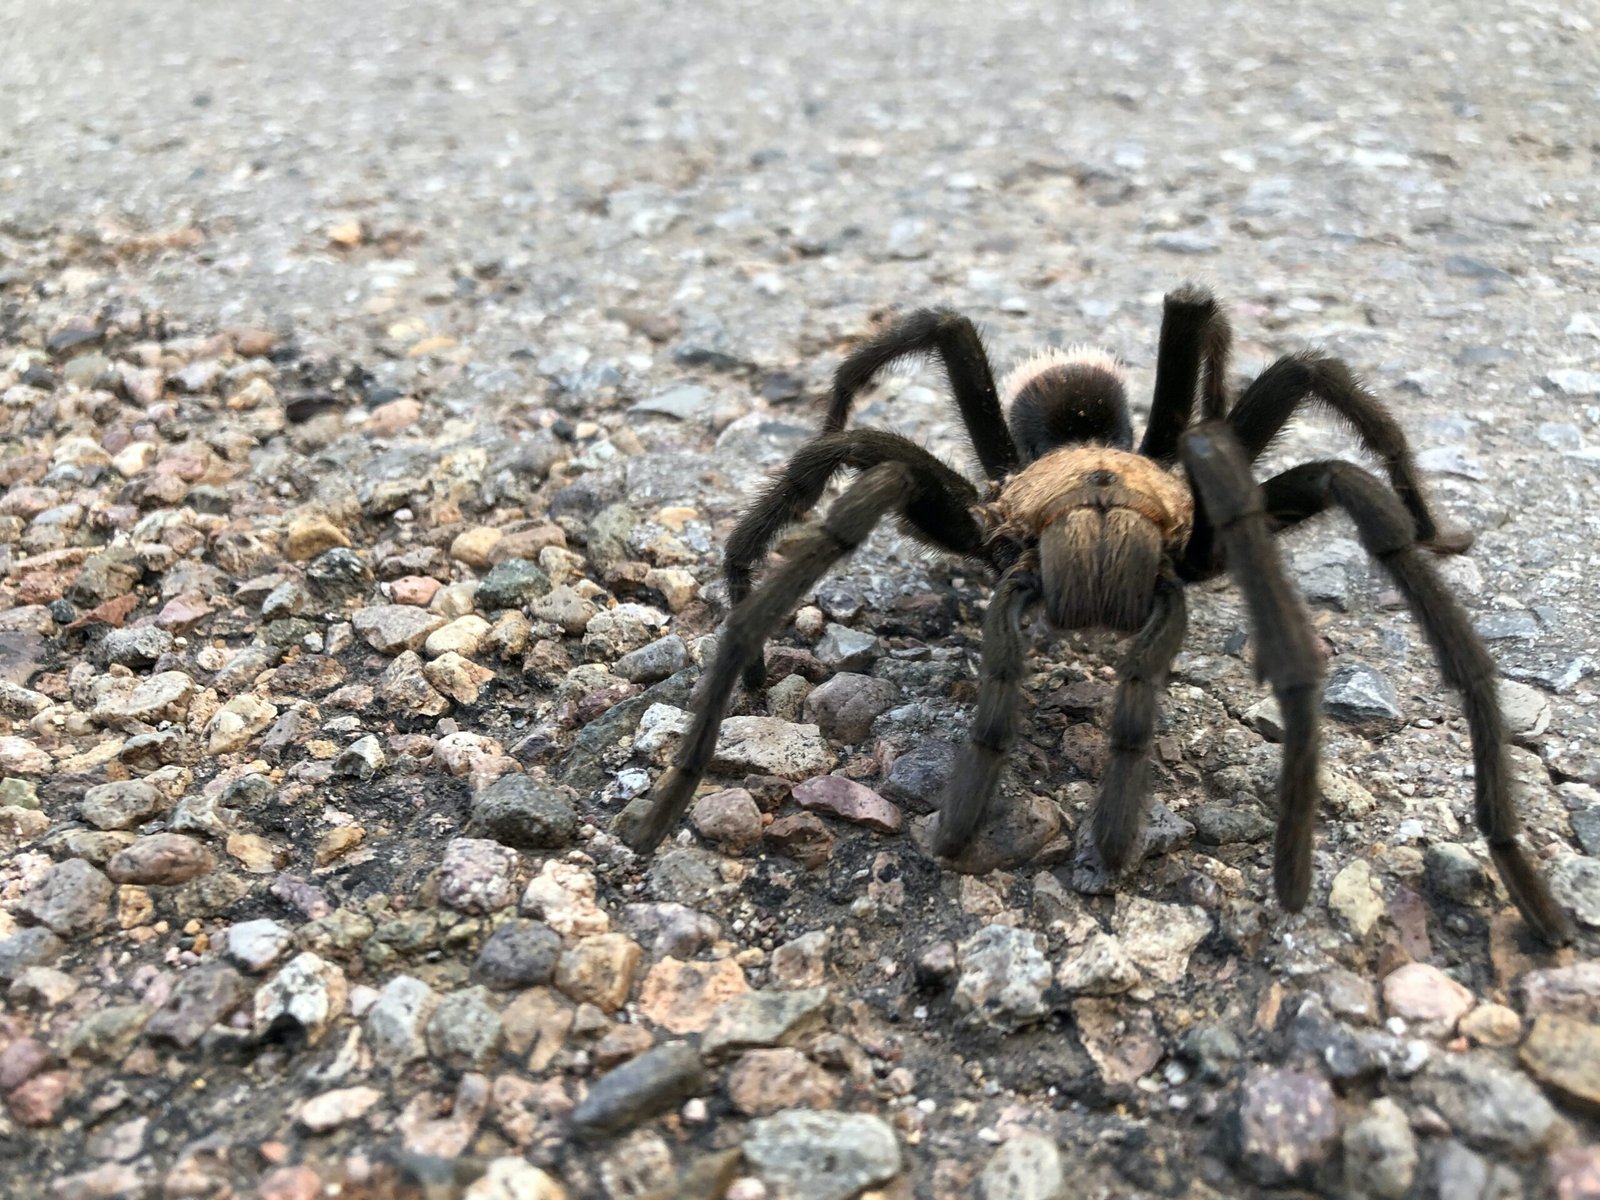 How Do I Prevent The Male Tarantula From Becoming Injured During Mating?